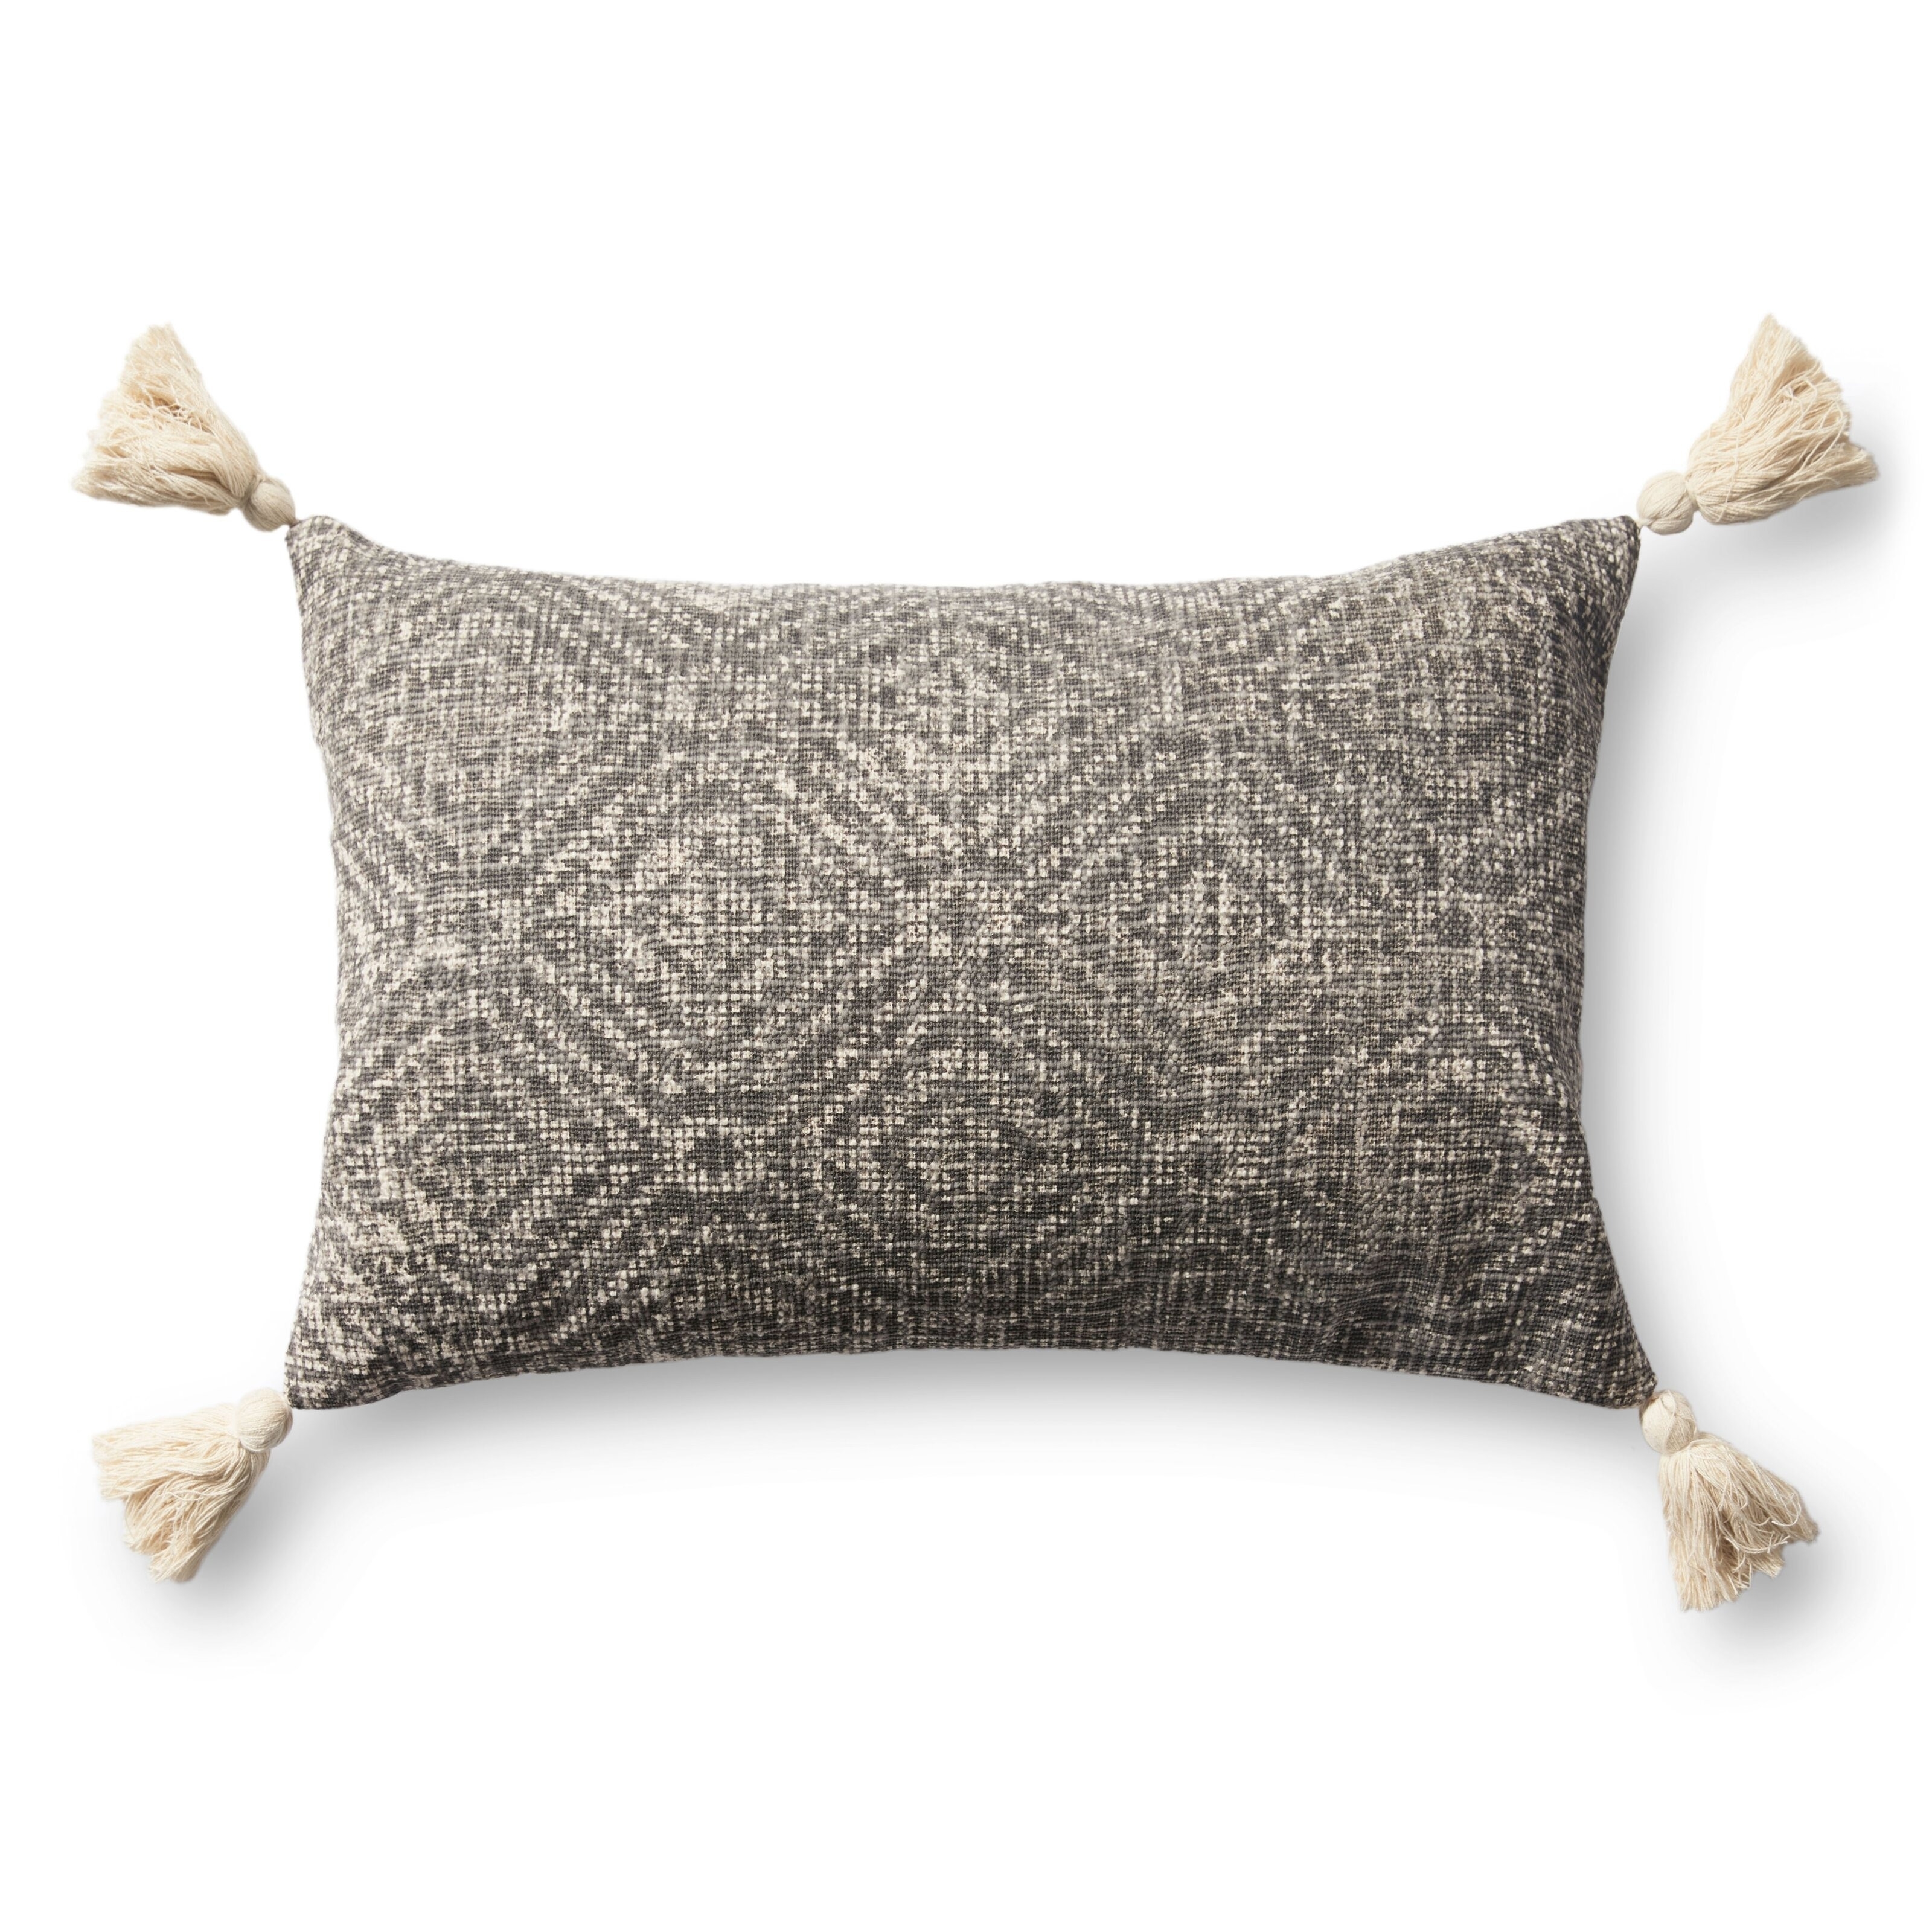 The pillow with a charcoal and white geometric pattern and a tassel on each corner